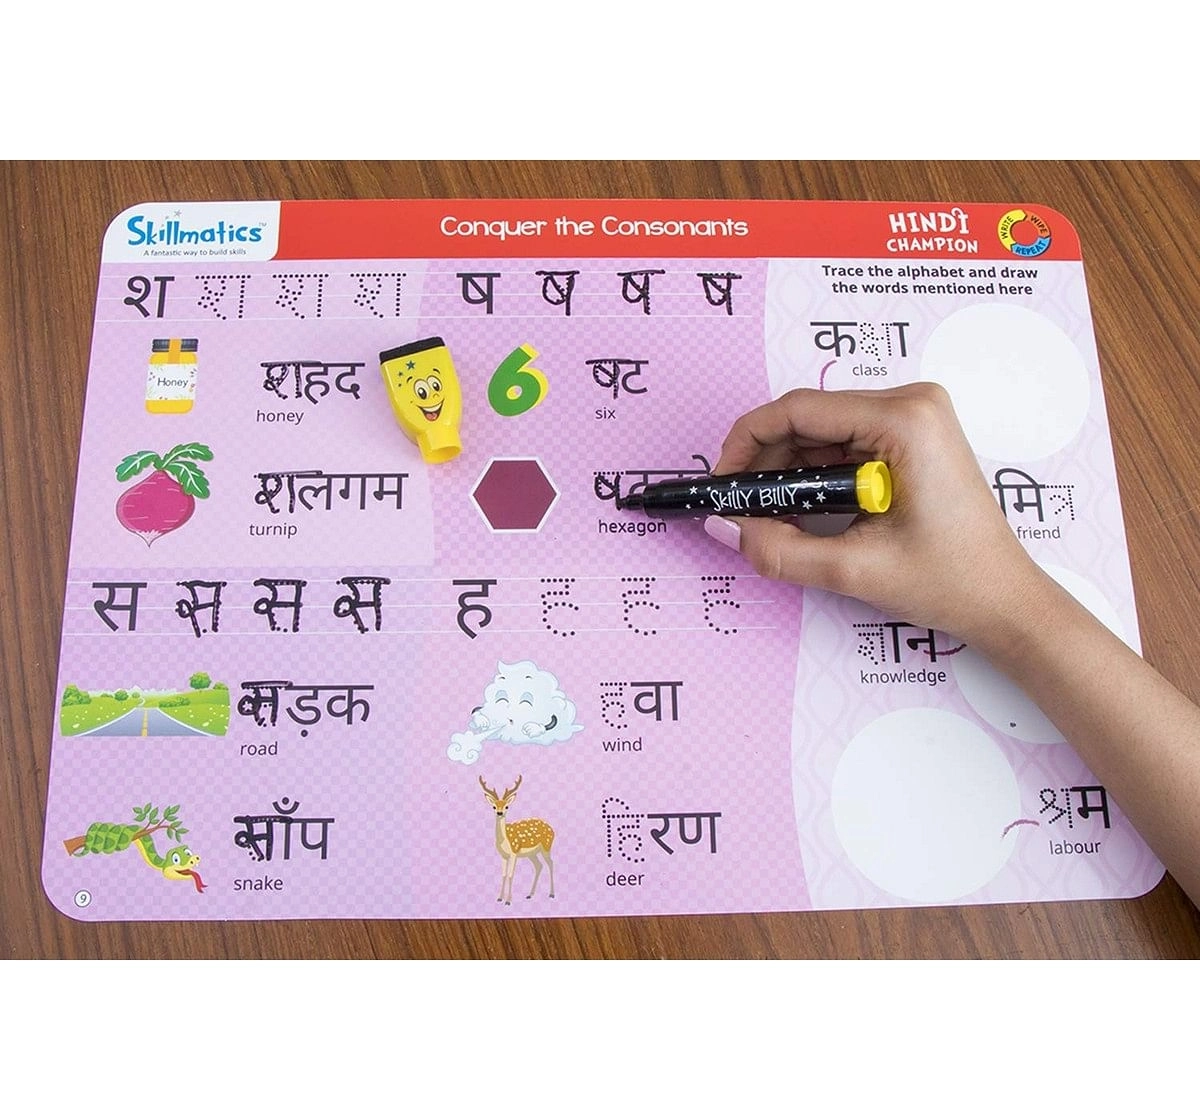  Skillmatics Educational Game : Hindi Champion 5-8 Years Games for Kids age 5Y+ 